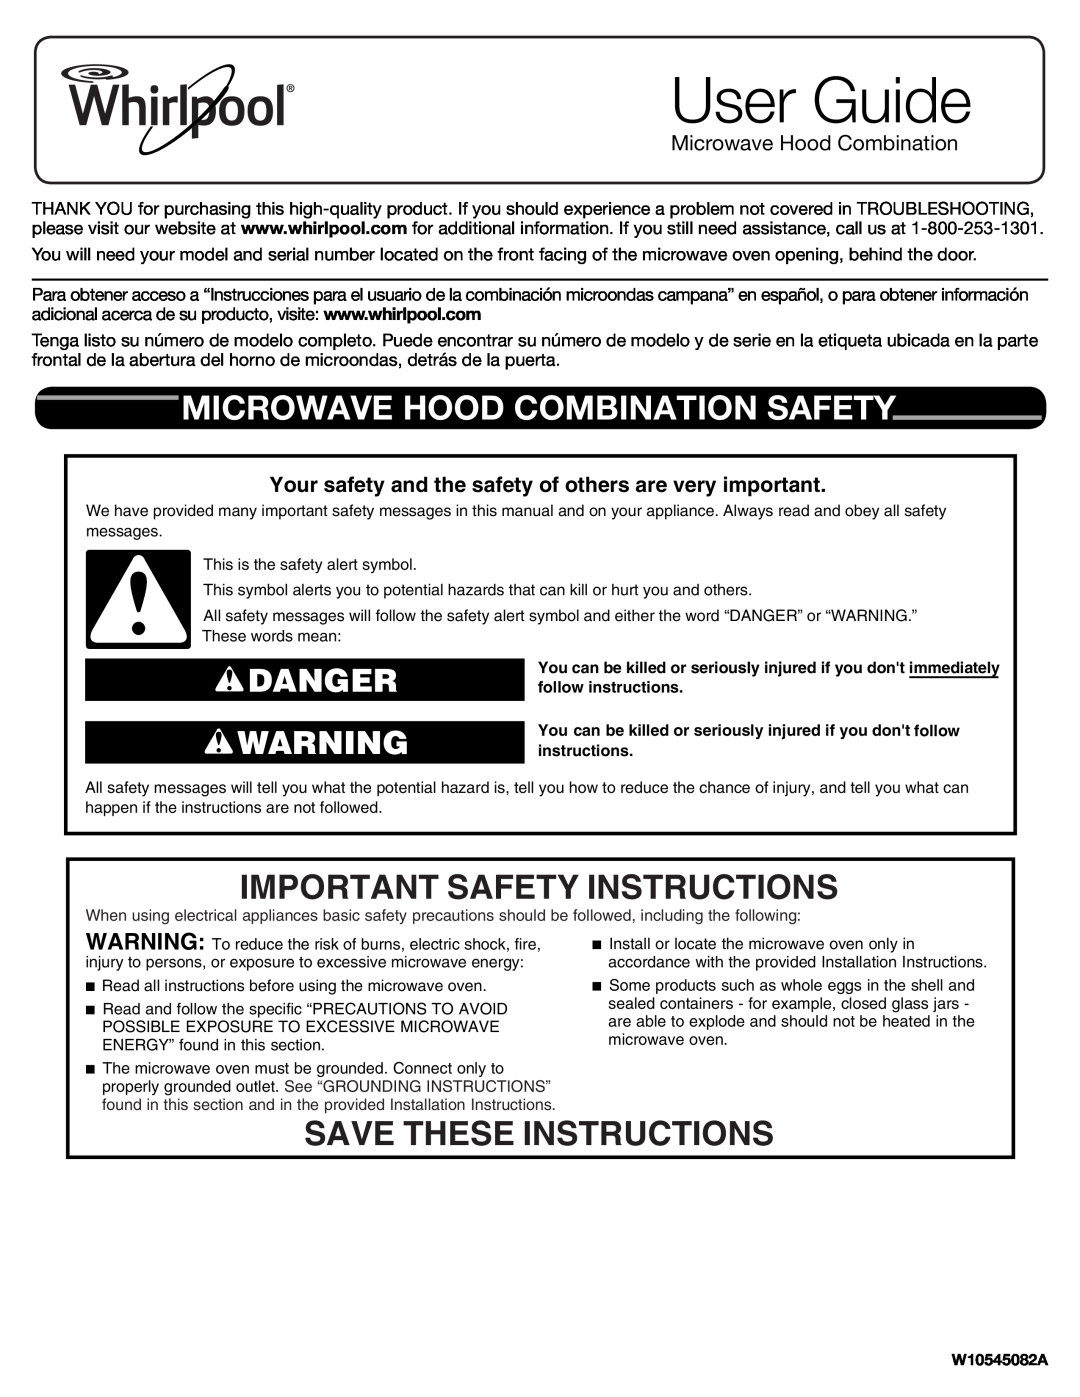 Whirlpool WMH31017AW important safety instructions Microwave Hood Combination Safety, Important Safety Instructions 